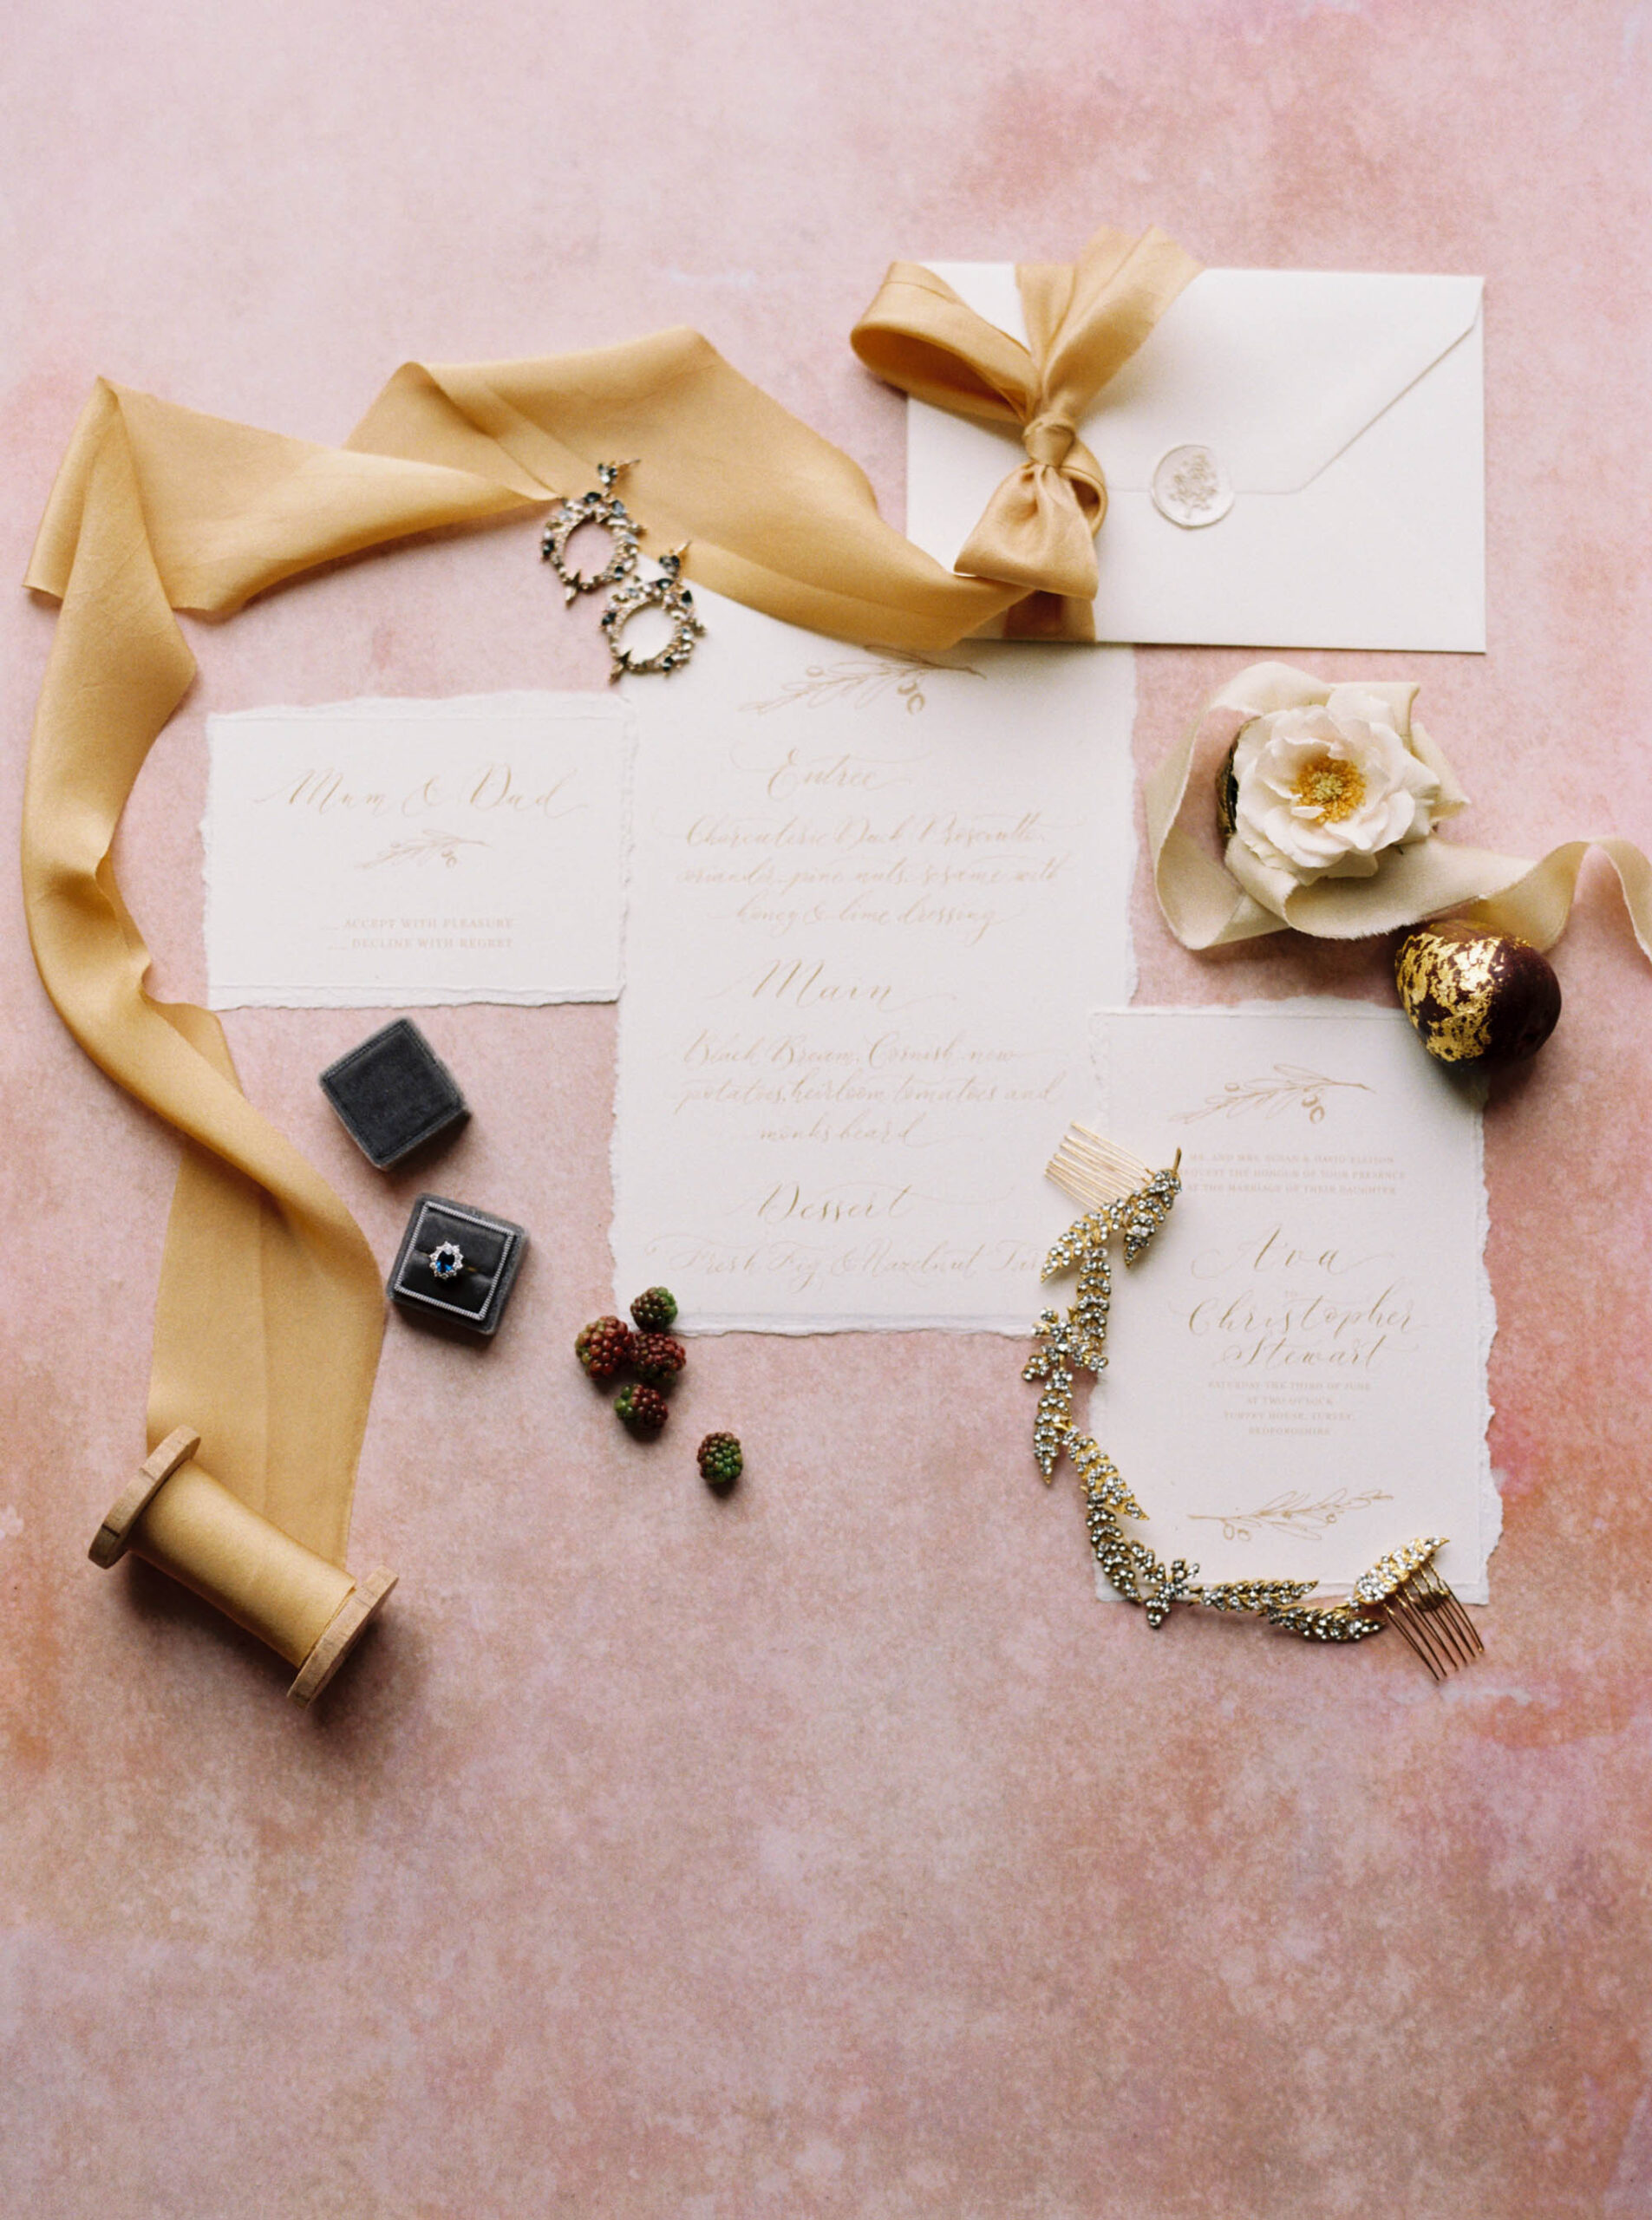 Wedding stationery flatlay with gold calligraphy and silk ribbon.